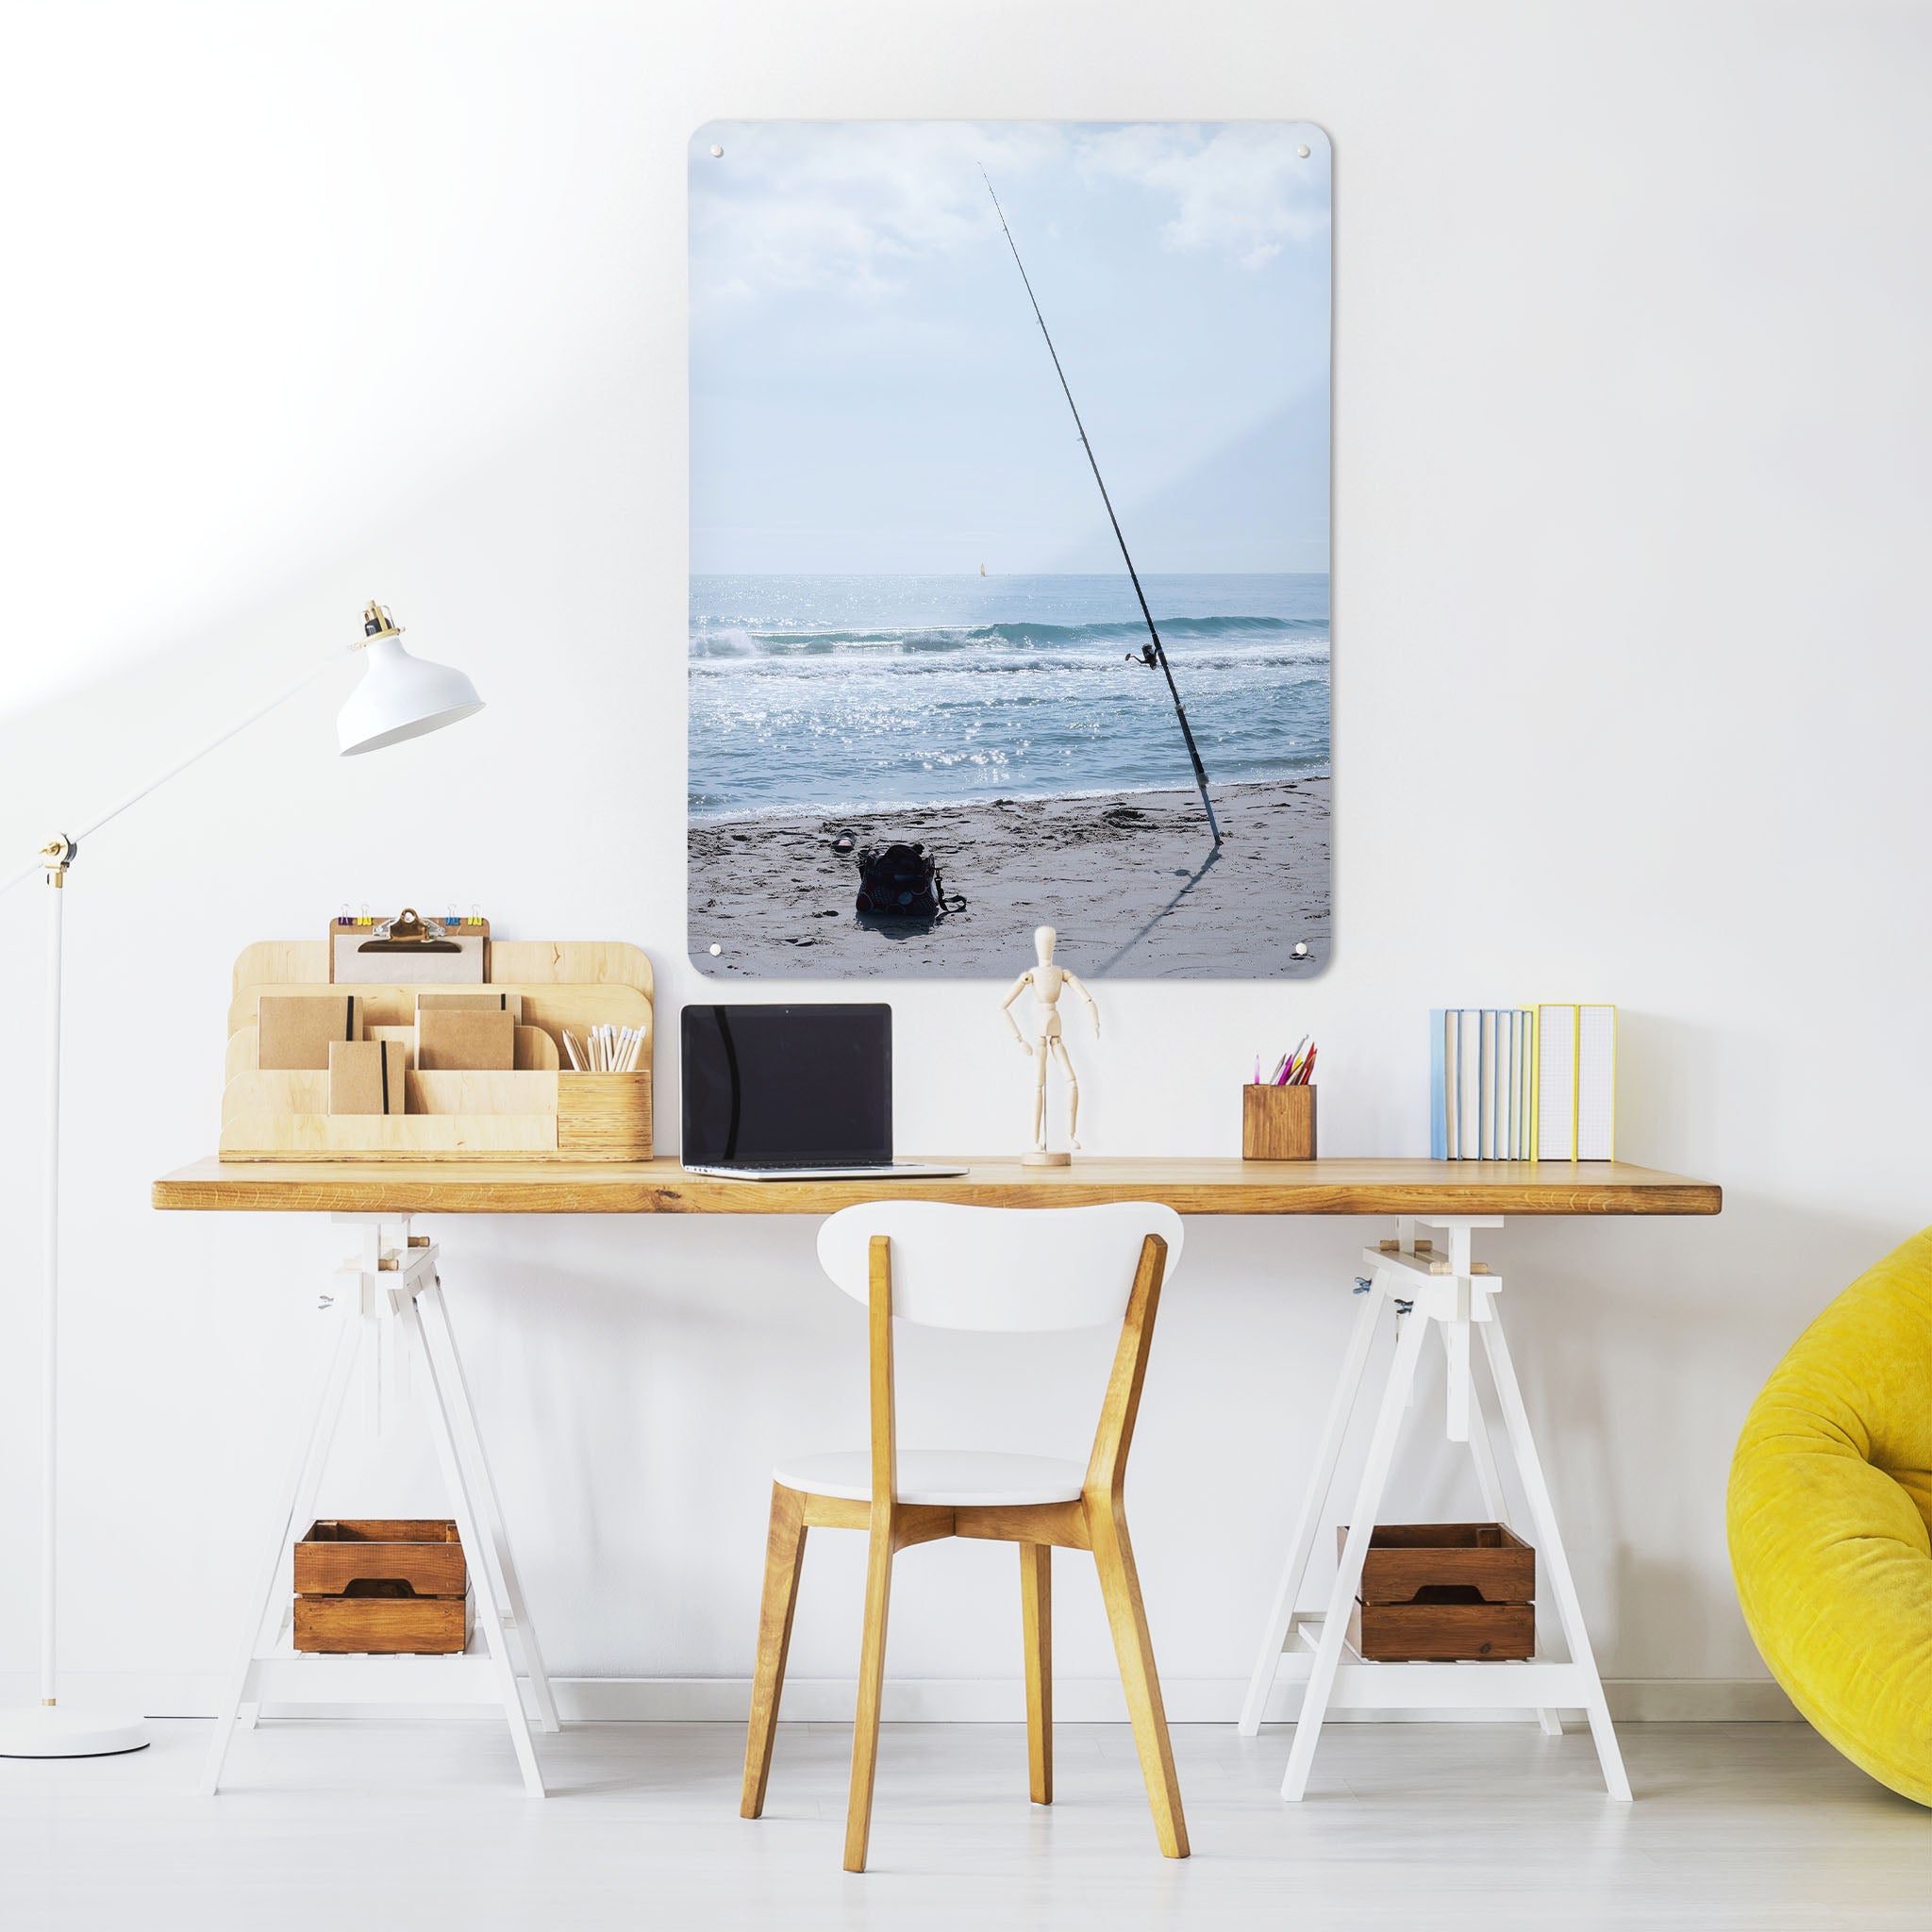 A desk in a workspace setting in a white interior with a magnetic metal wall art panel showing a photograph of fishing tackle on a sunny beach